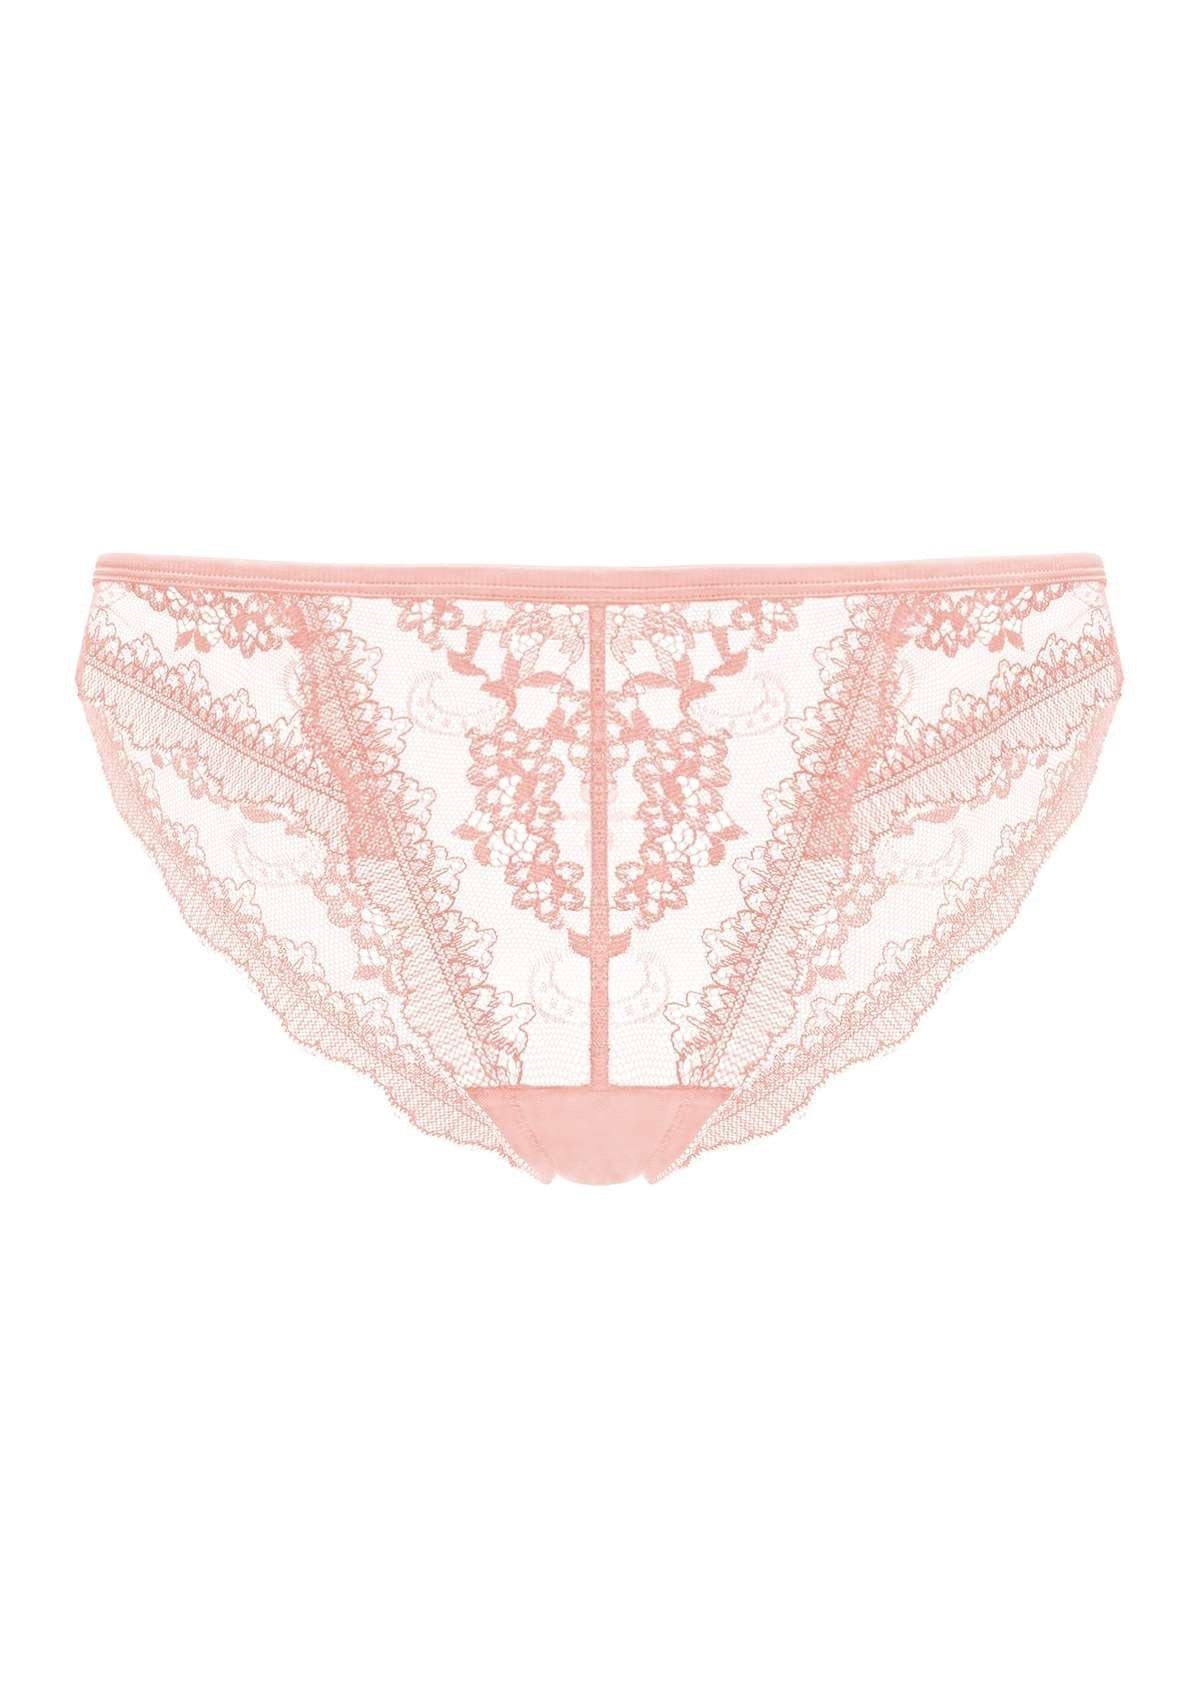 HSIA Floral Bridal Lace Back Cheeky Delicate Underwear  - Pink / XXL